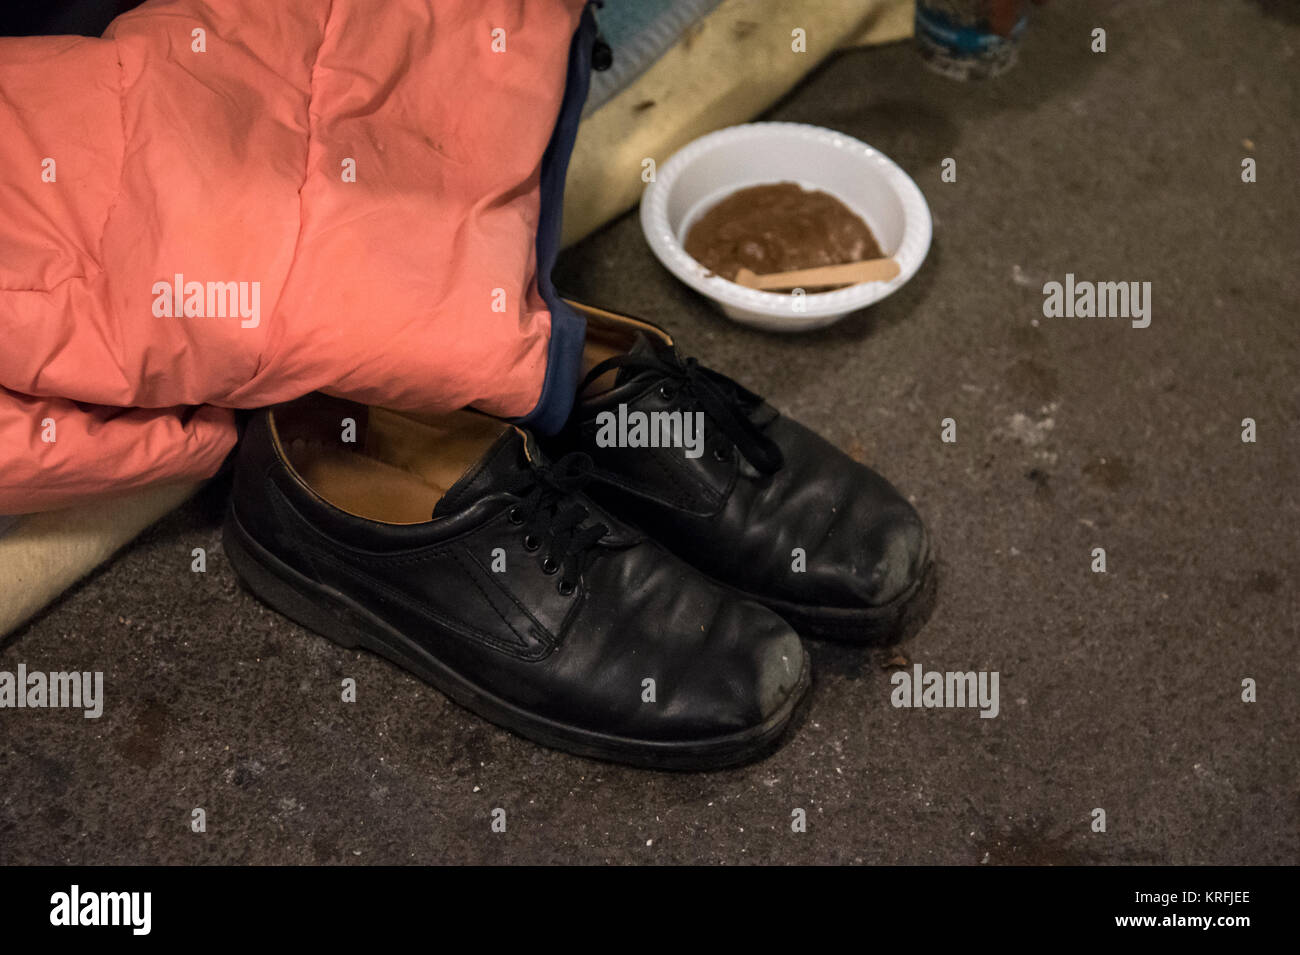 Munich, Germany. 16th Nov, 2017. A pair of shoes and a plate with food handed out by the organisation 'Kaeltebus e.V.' (lit. 'Cold Bus') can be seen on the ground in Munich, Germany, 16 November 2017. The voluntary workers of the winter bus bring out warm food and drinks to homeless people Credit: Amelie Geiger/dpa/Alamy Live News Stock Photo